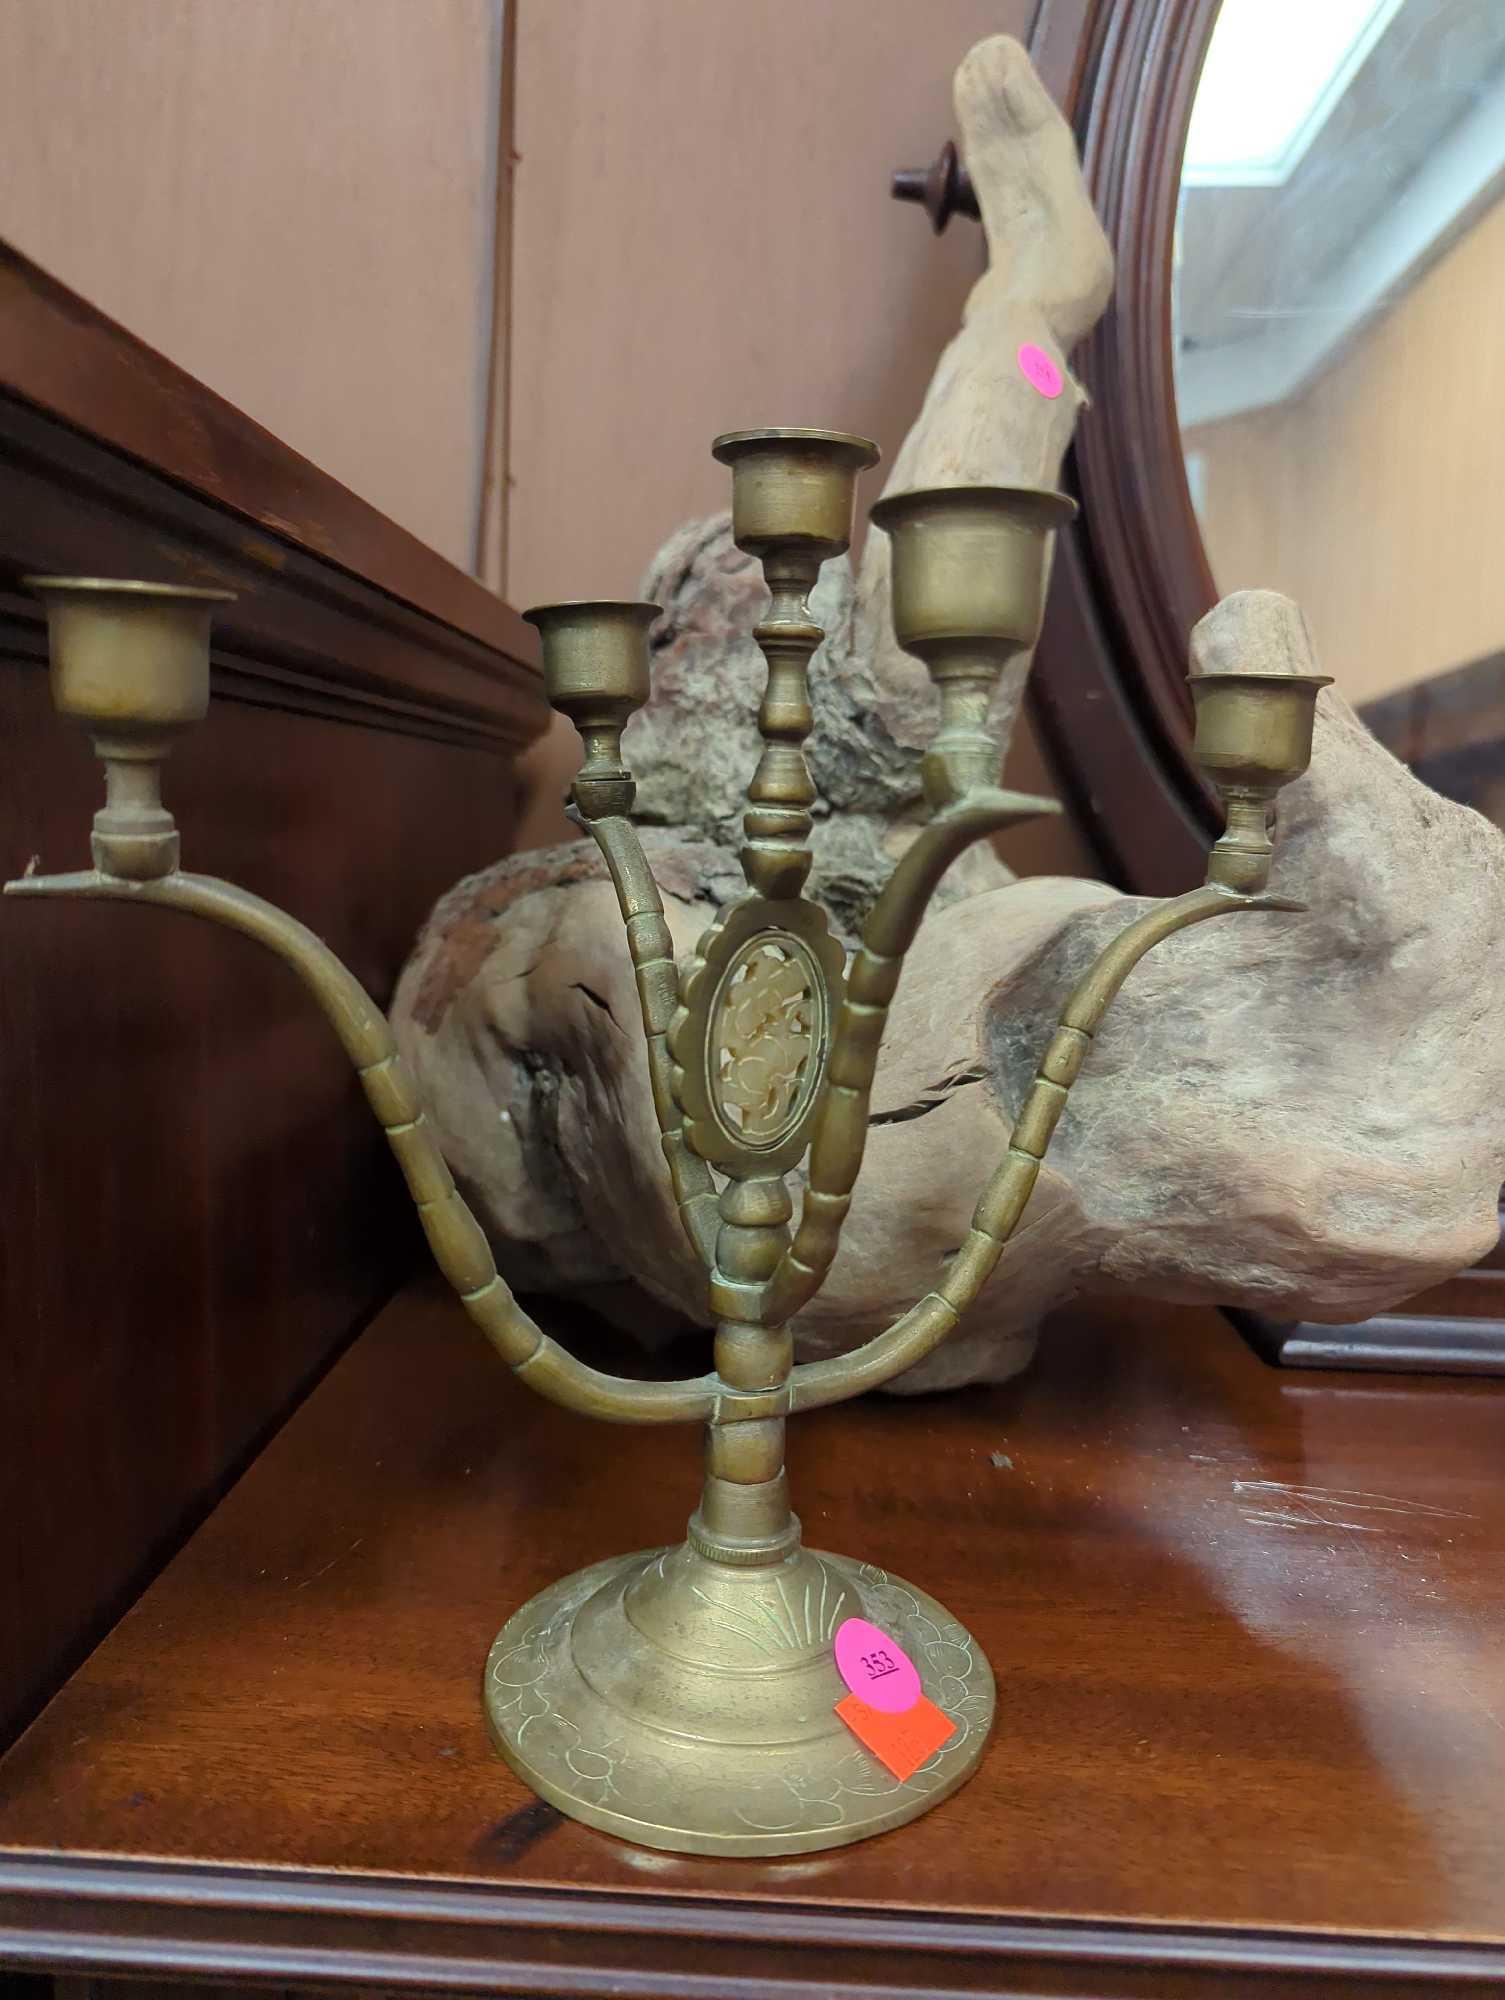 Chinese Brass Candelabra with Plaque, In Great Condition Retail Price Value $60, What you see in